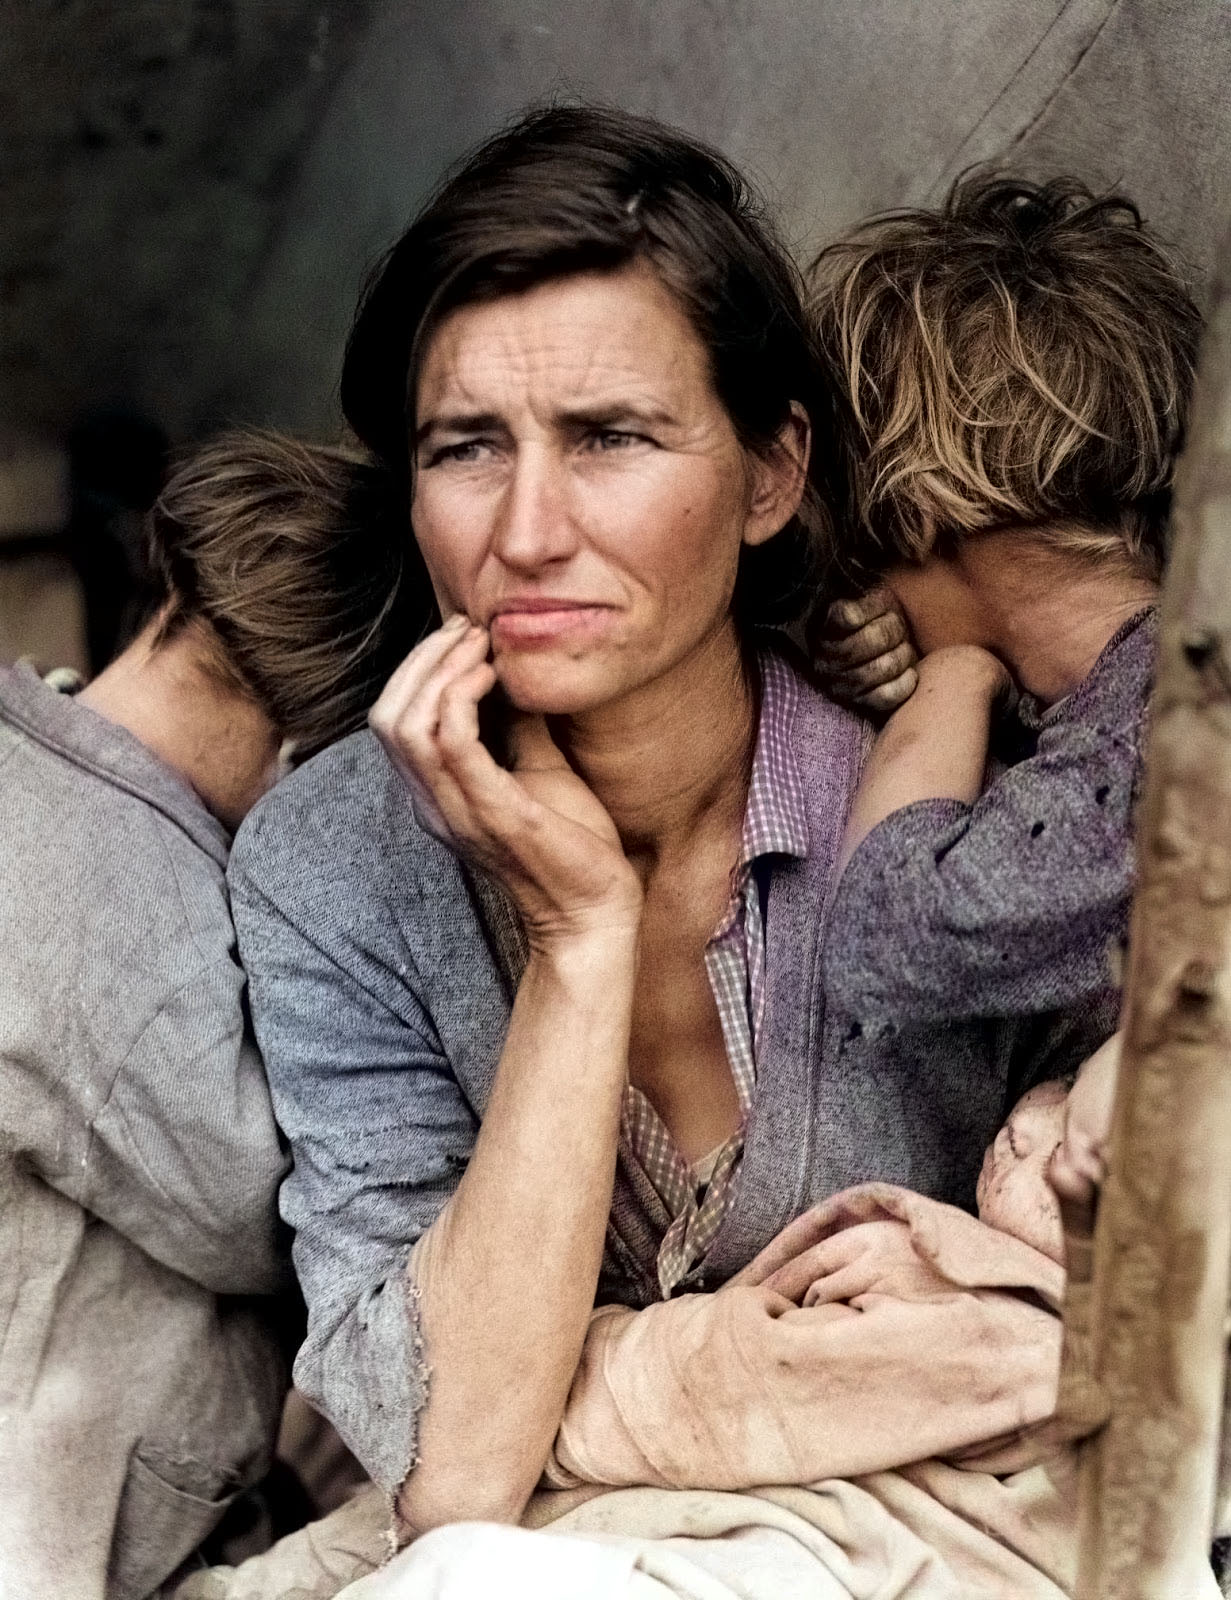 Colorize Filter- Migrant Mother in color